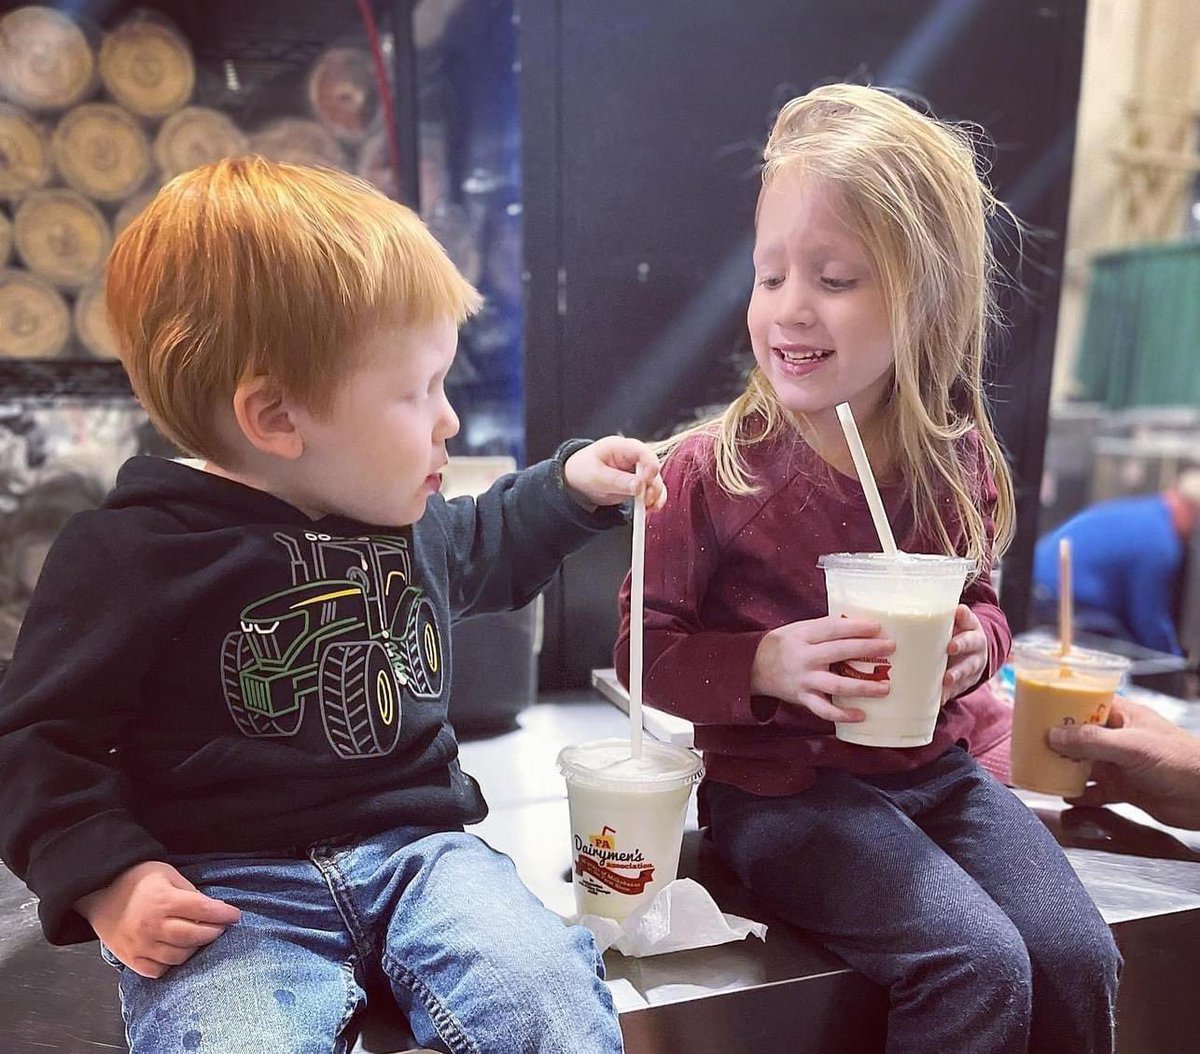 Throwing it back to all your #milkshakesmiles70 at the #PaFarmShow. Follow us on social and padairymens.com on where to find us in the coming months and to even request a Milkshakes on the Moove pop up at your event. #tbt